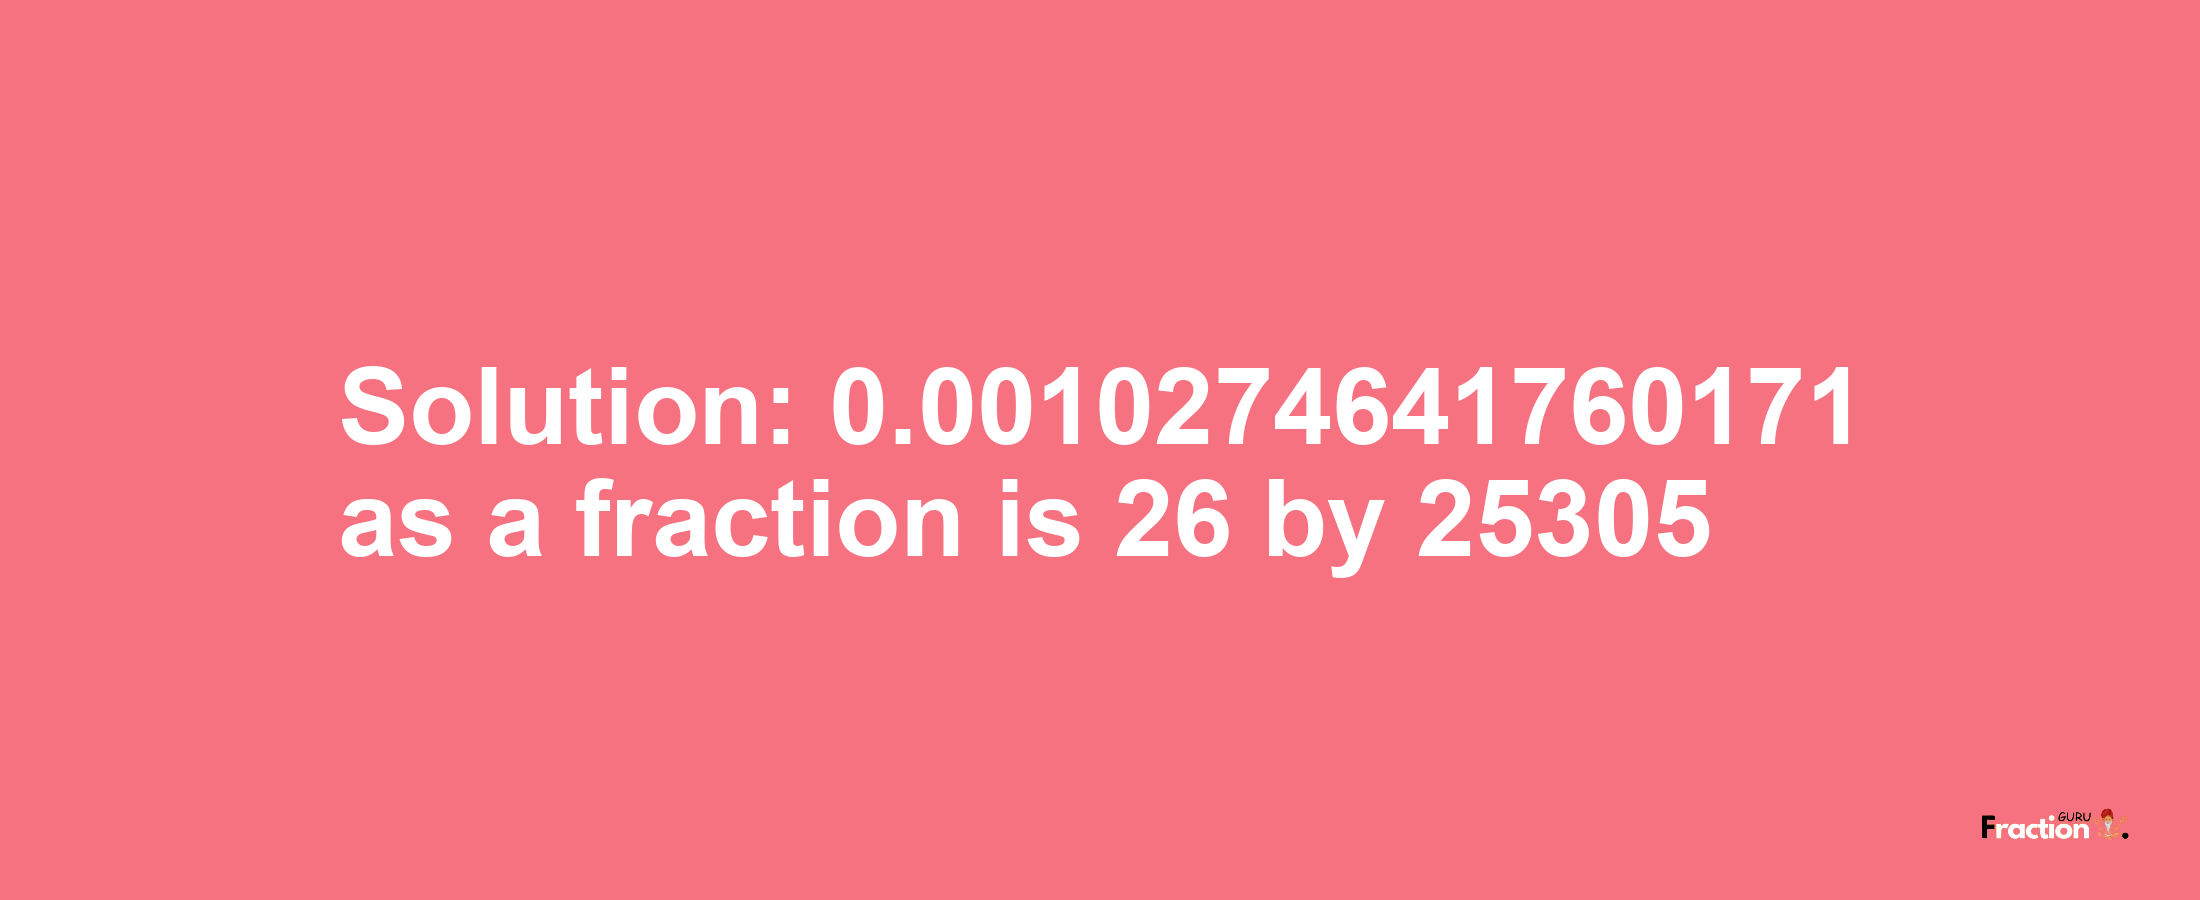 Solution:0.0010274641760171 as a fraction is 26/25305